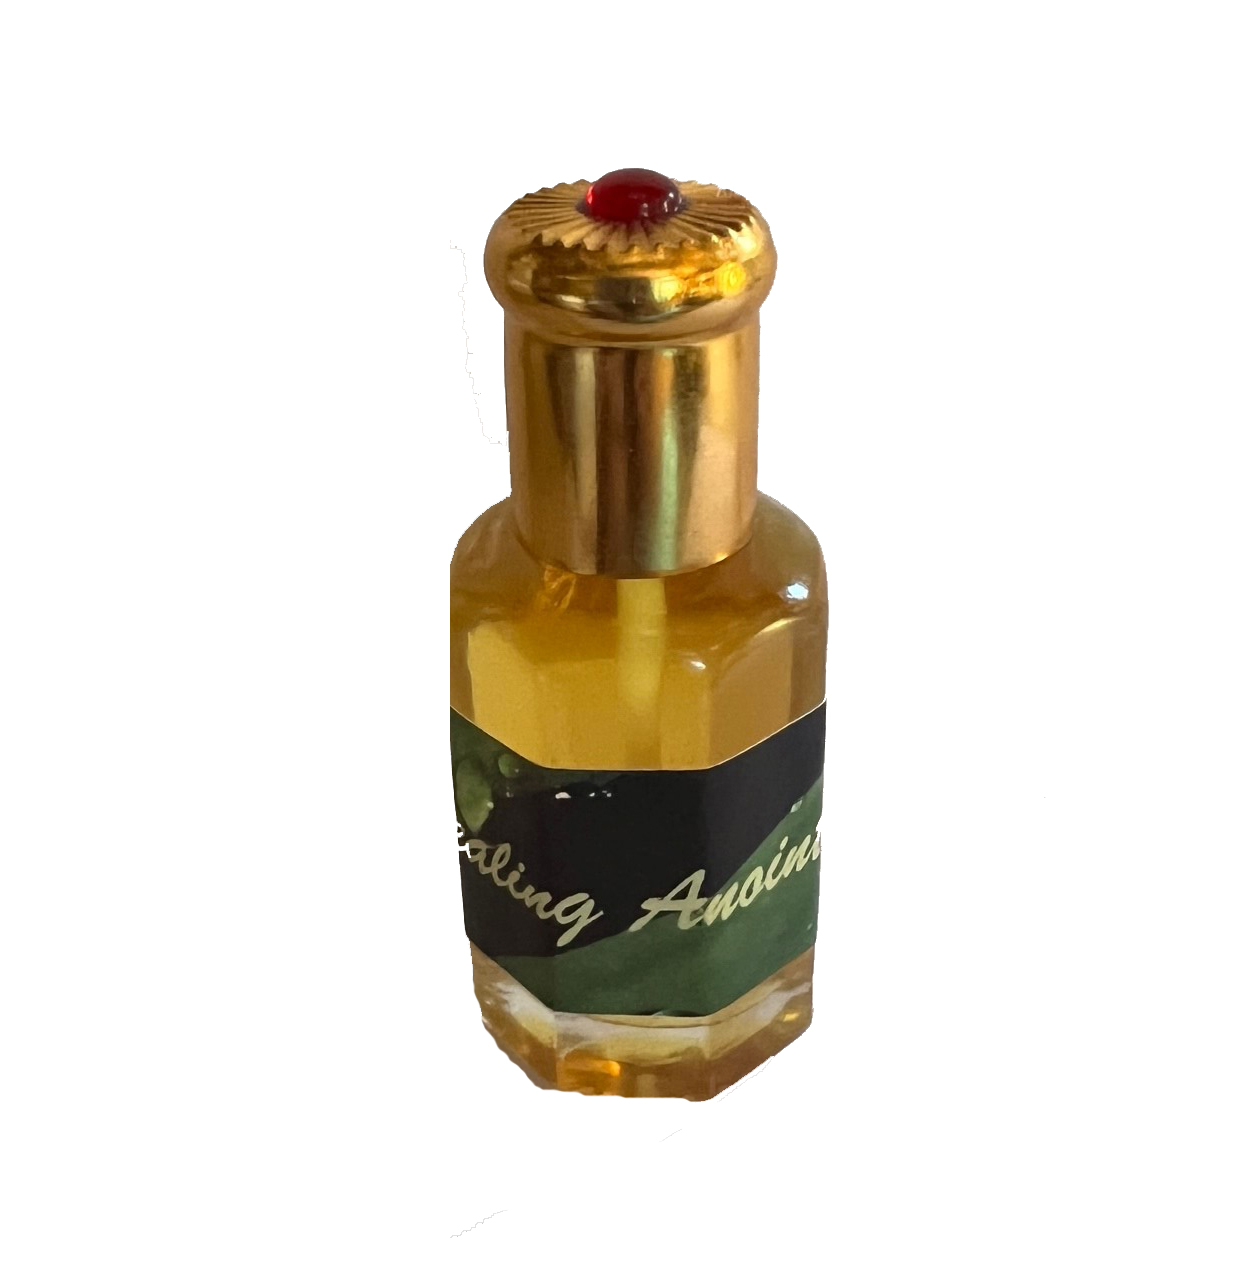 The Oil of Gilead Healing Anointing Oil